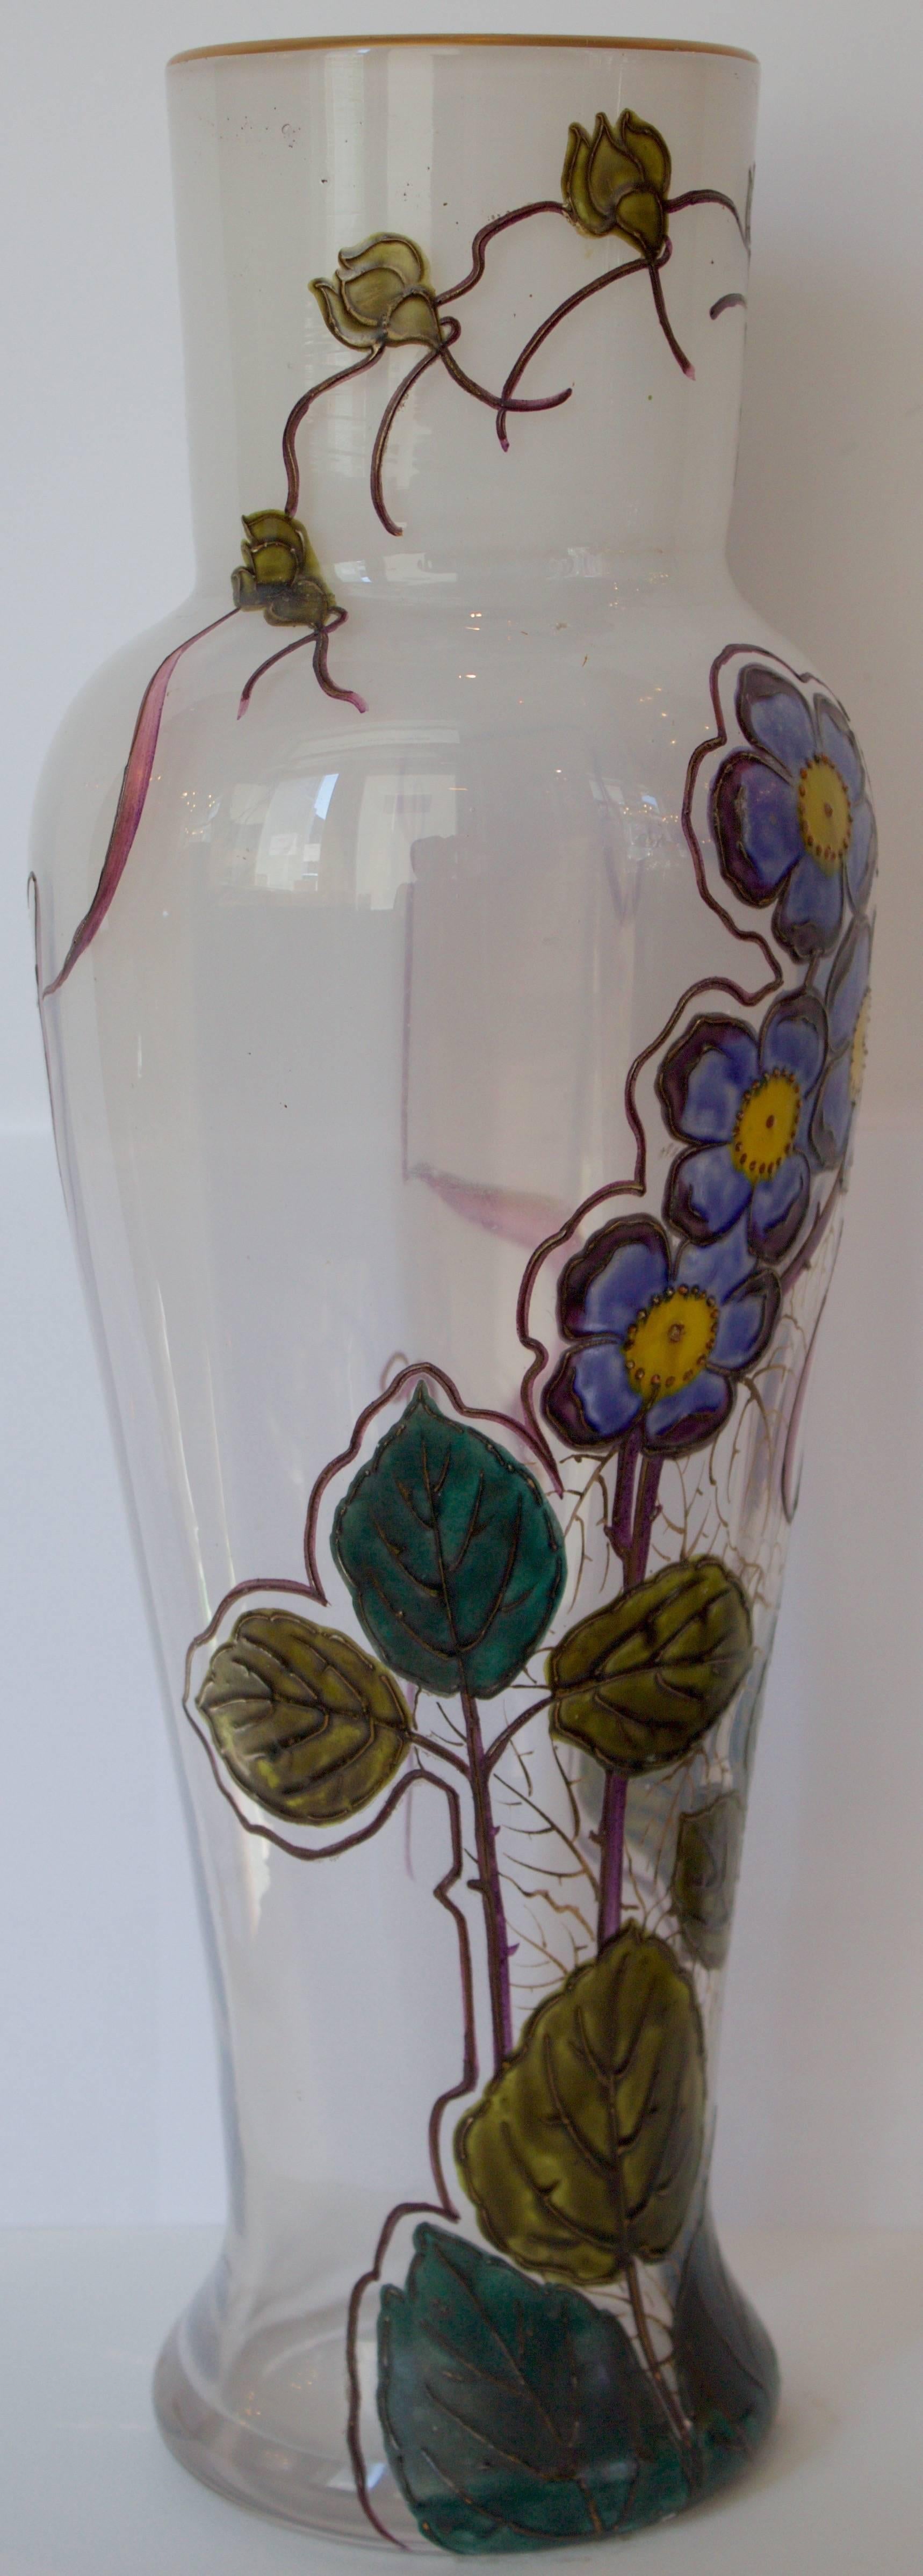 Hand-Crafted French 19th Century Glass Vase by Legras Signed 